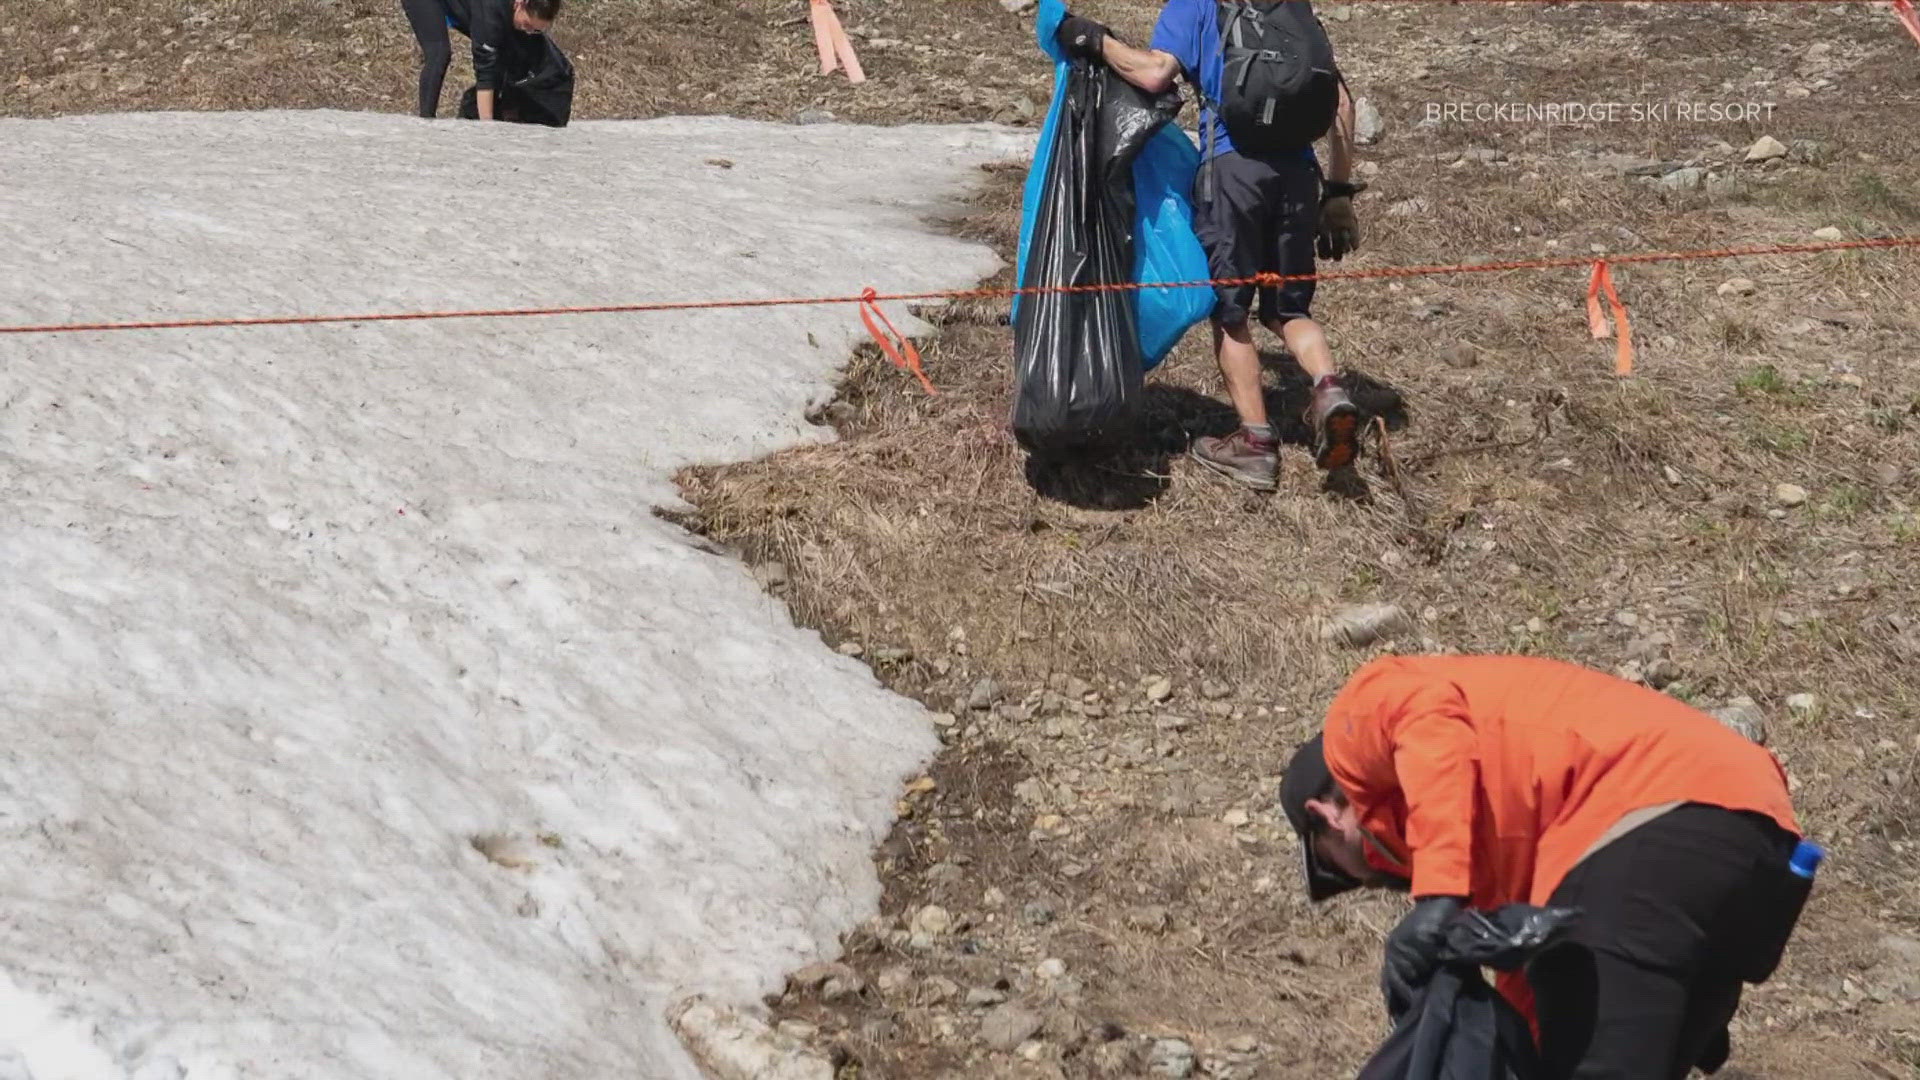 More than 200 employees removed about 800 pounds of trash from the mountain—and boy, did they find some weird stuff!